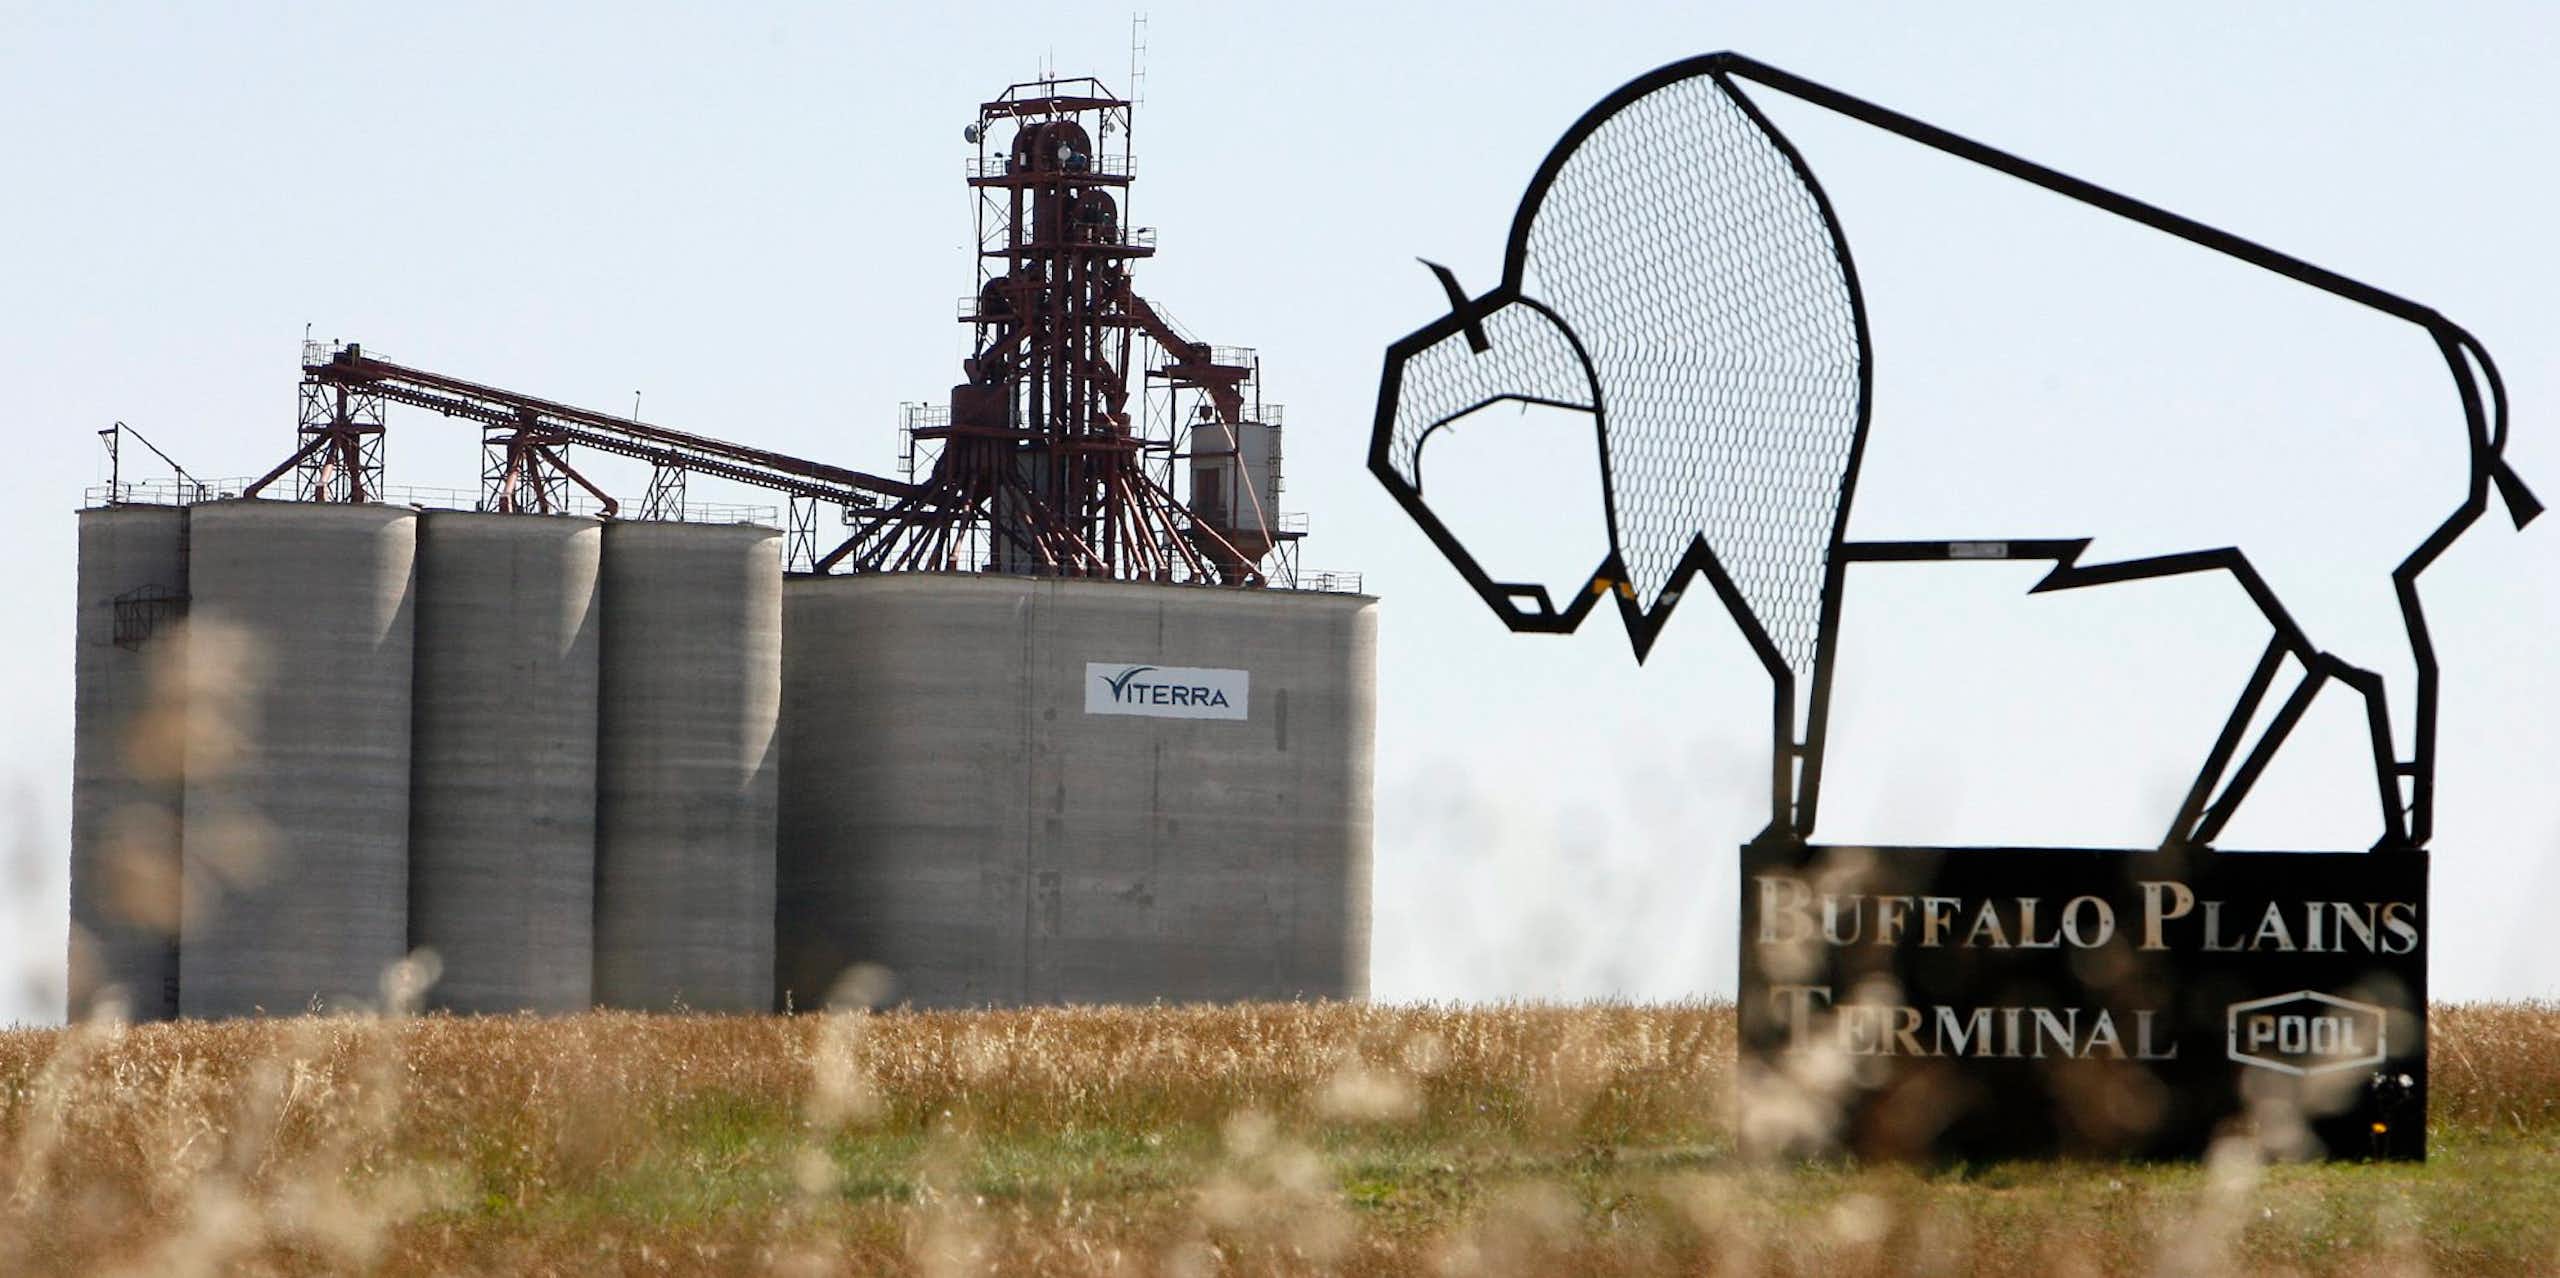 A wire sculpture of a buffalo with the words 'Buffalo Plain Terminal' sits in the foreground, while a grain elevator is seen in the background 